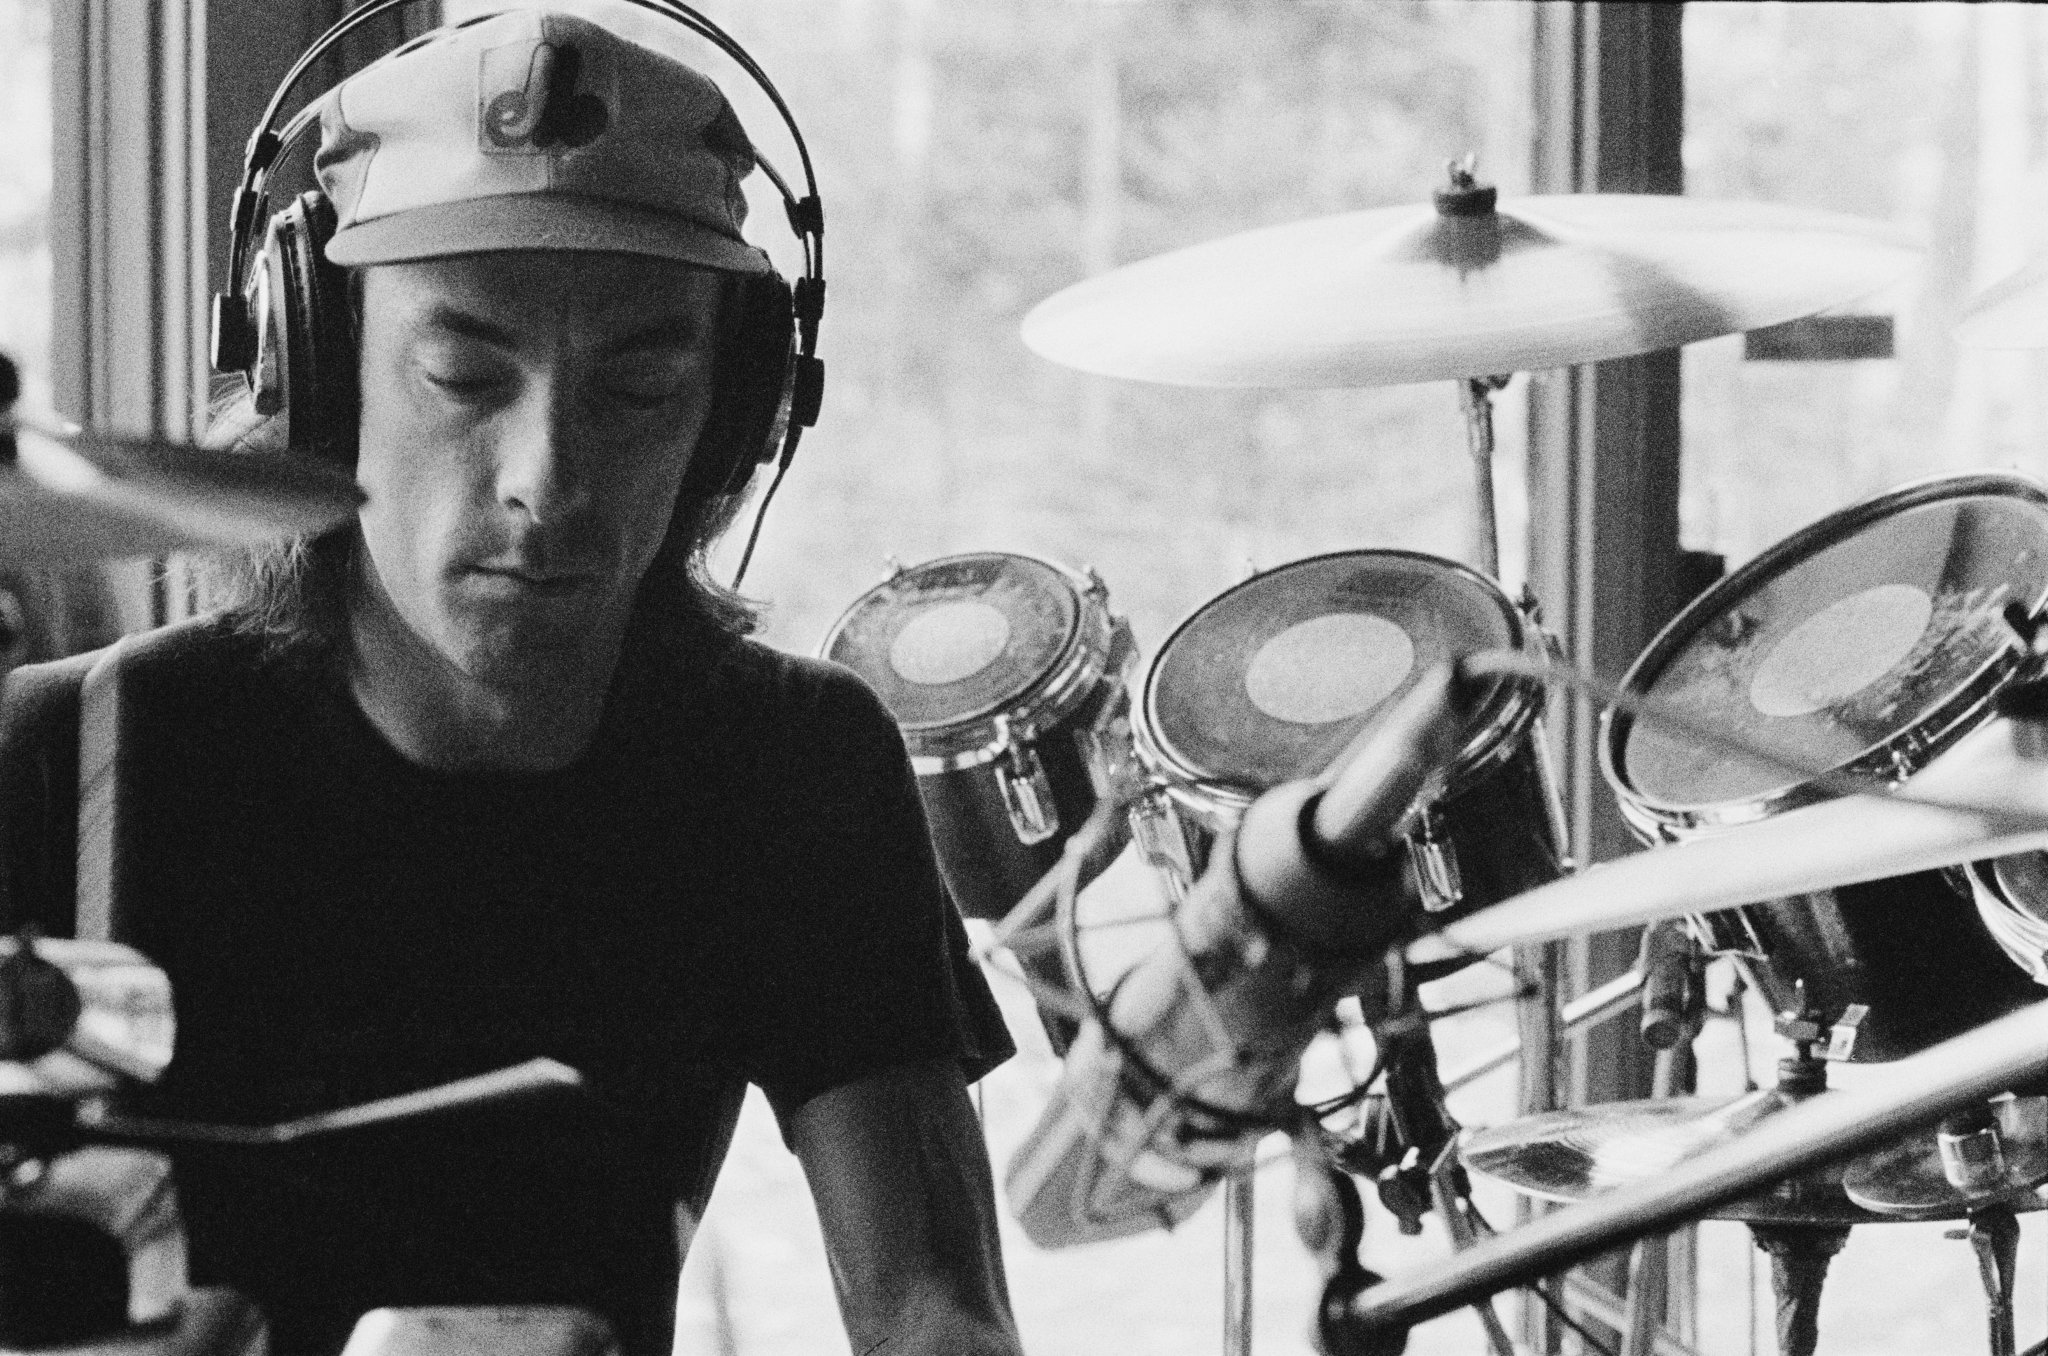 Remembering 5 of Neil Peart's Most Powerful Song Lyrics